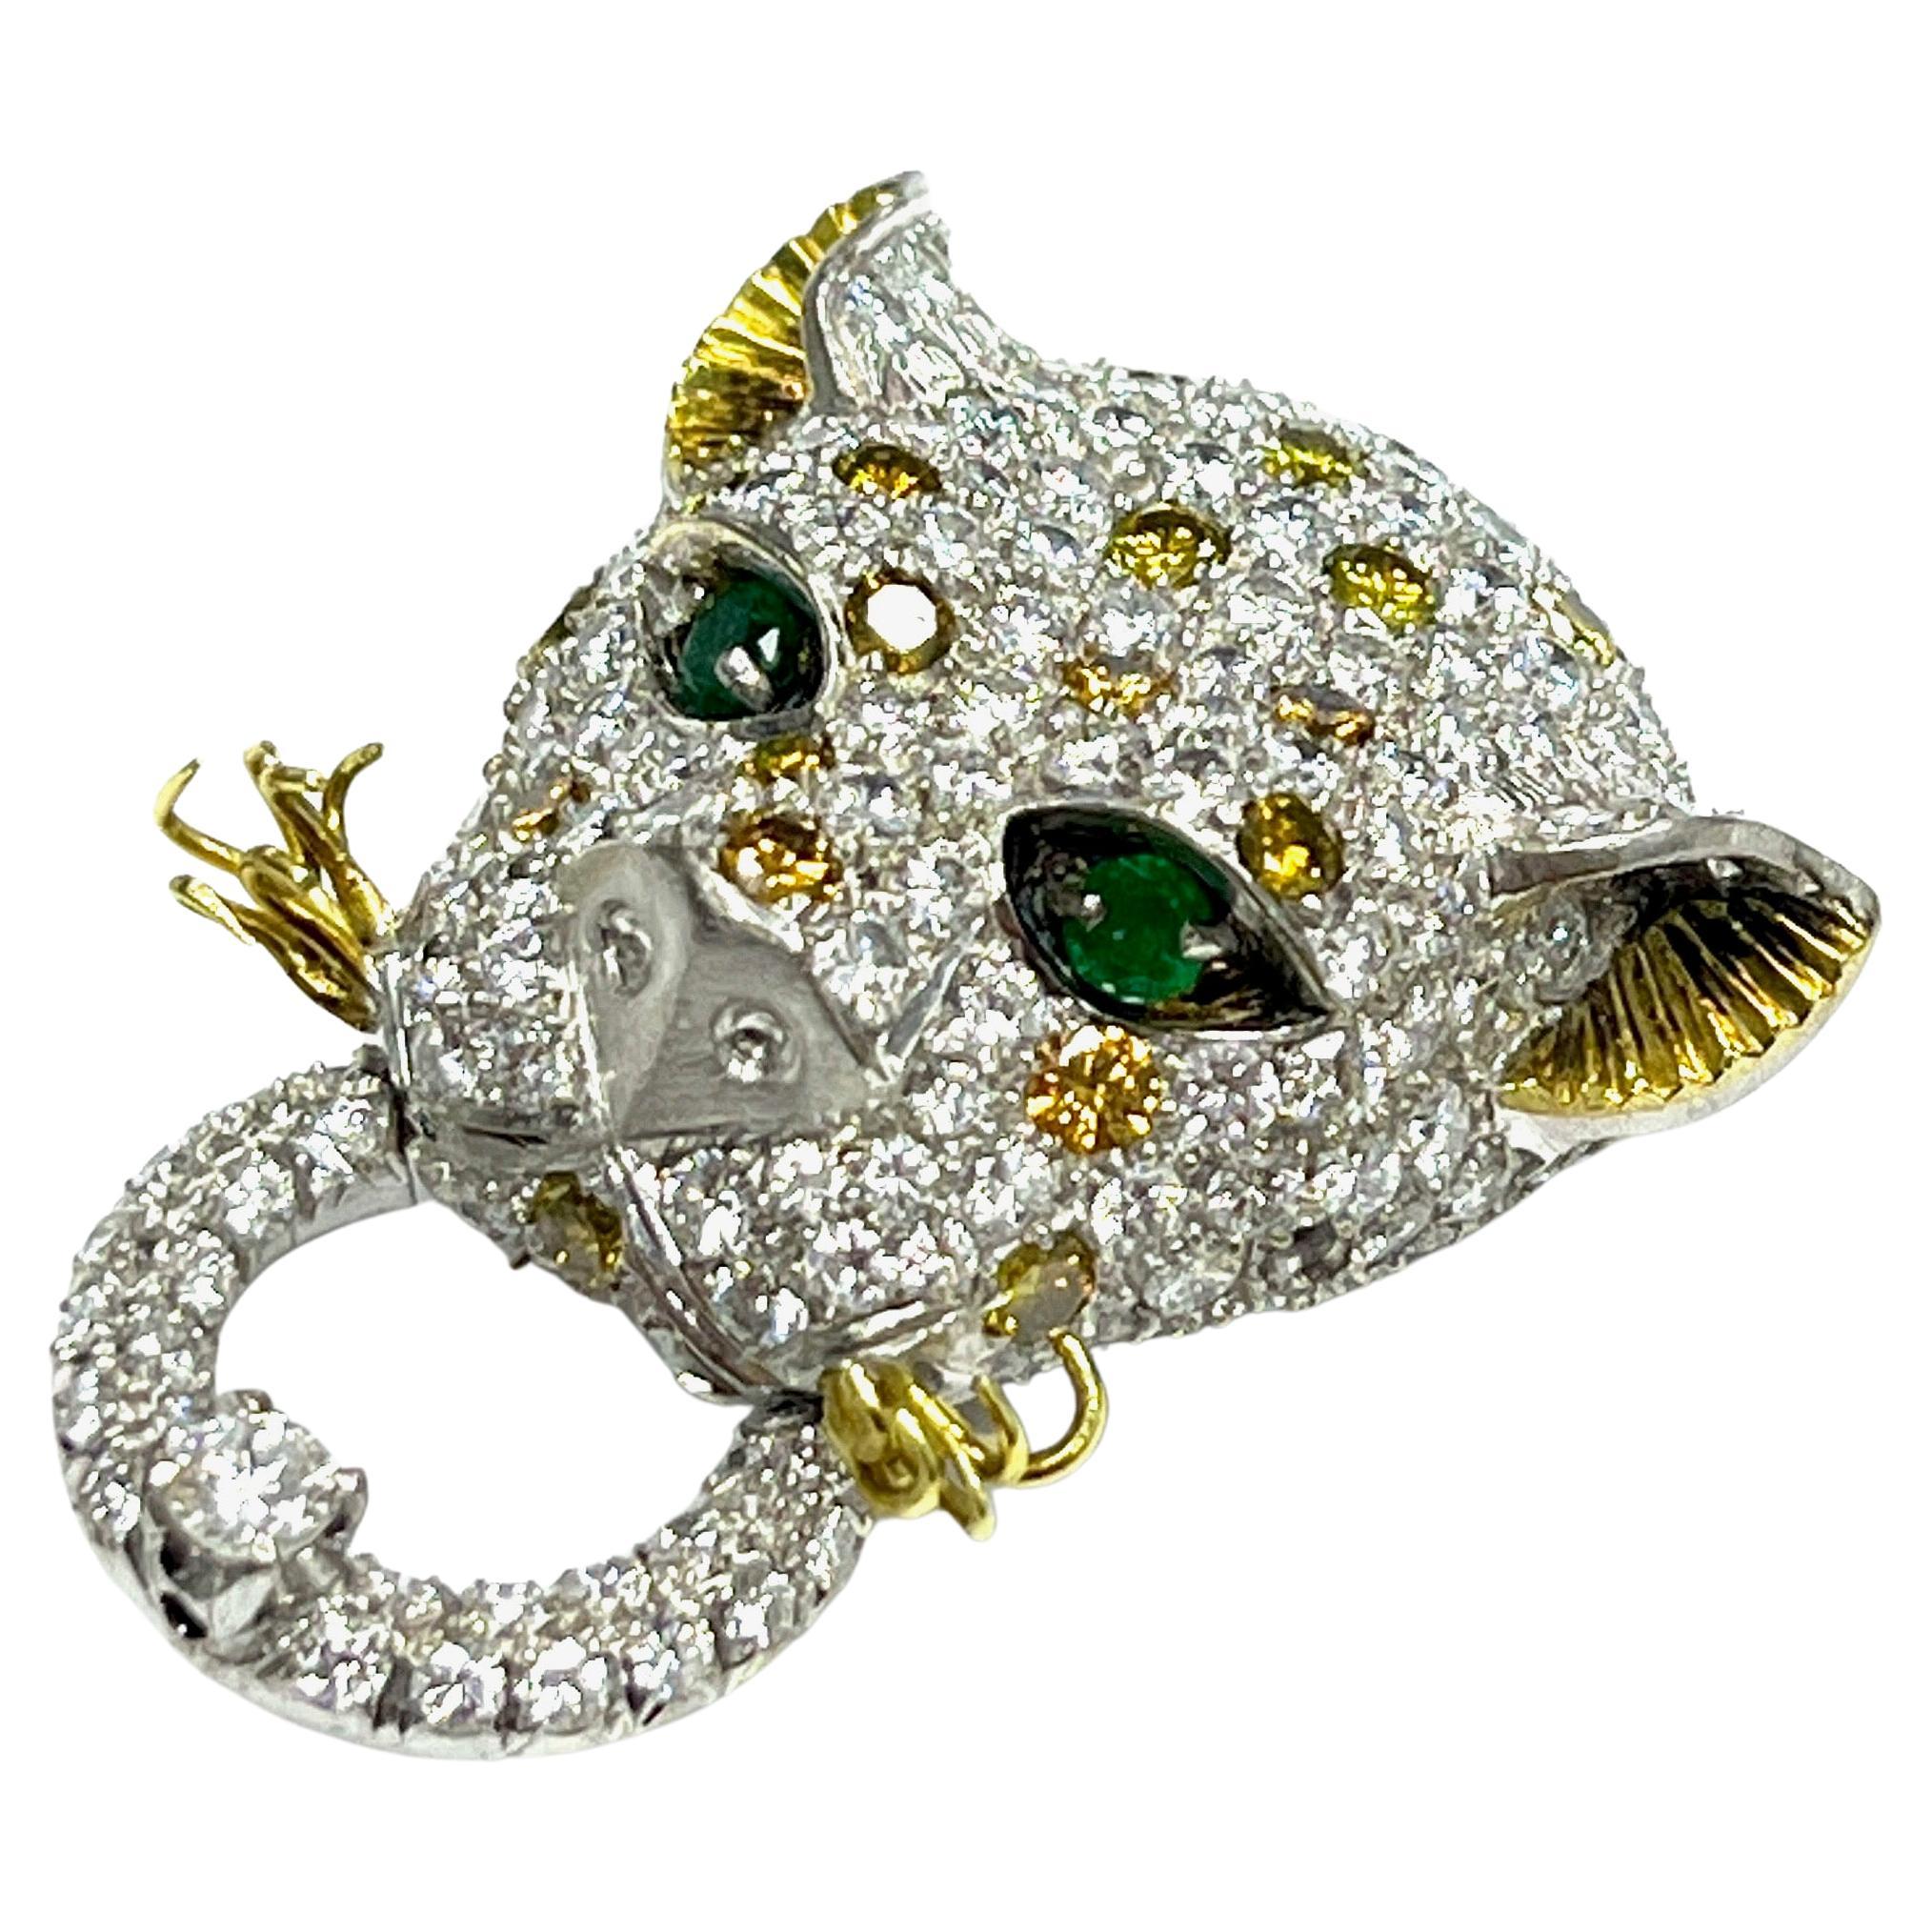 Leopard Diamond Emerald White & Yellow Gold Brooch

Two hundred twenty-six round brilliant-cut diamonds of approximately 15.82 carats total, with SI1 clarity, and twenty irradiated yellow and two hundred six H color; two natural emeralds for eyes of